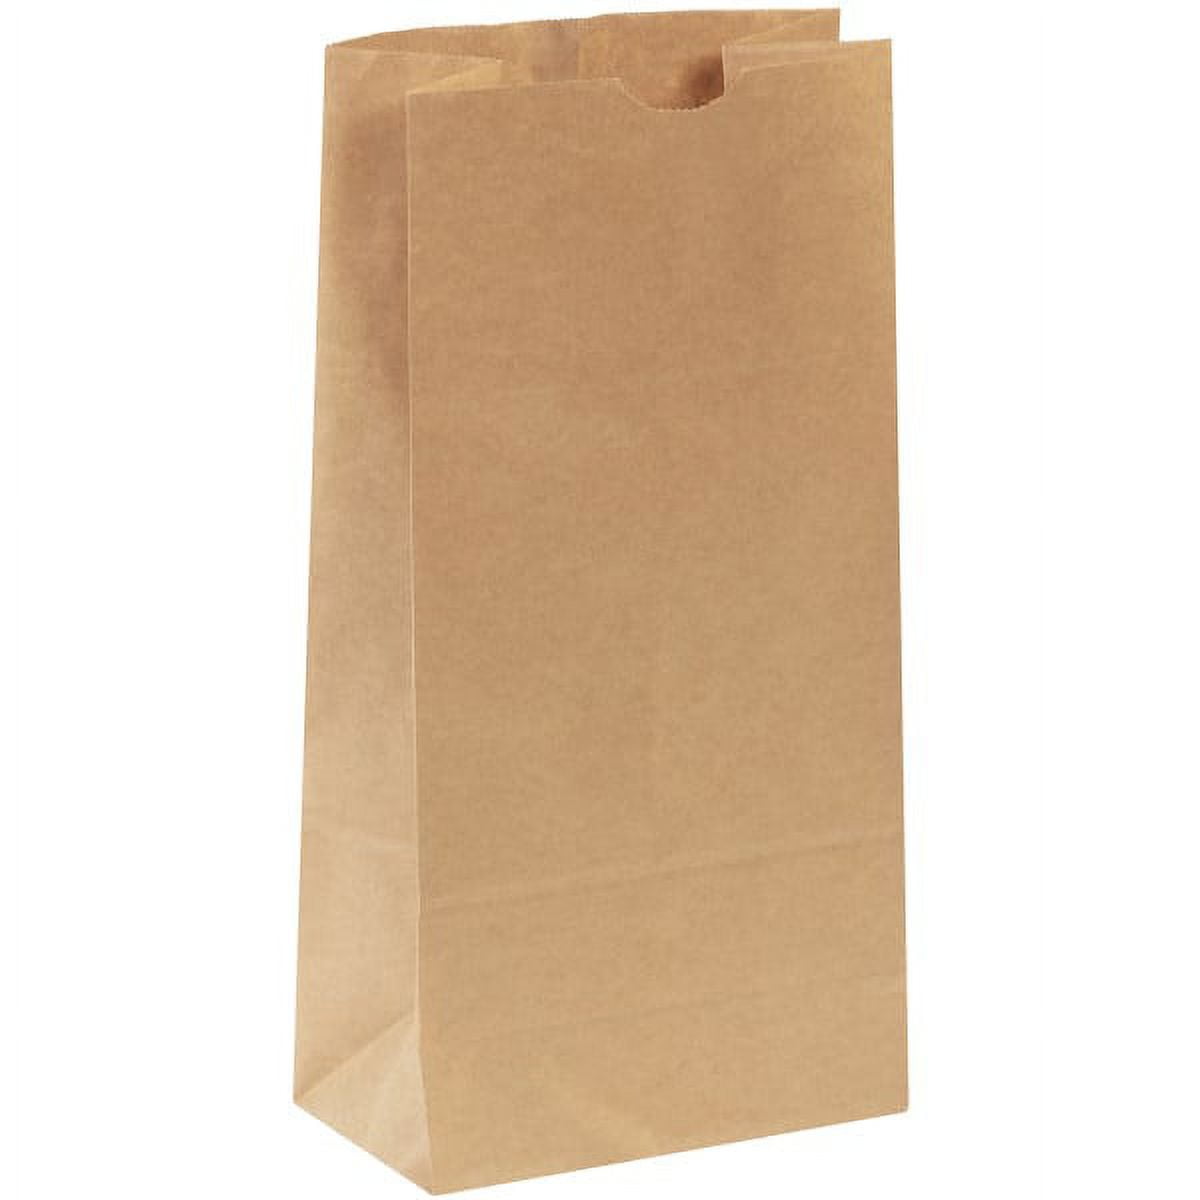 Picture of Box Partners BGH129K Kraft Hardware Bags - 7.75 x 4.75 x 16 in.